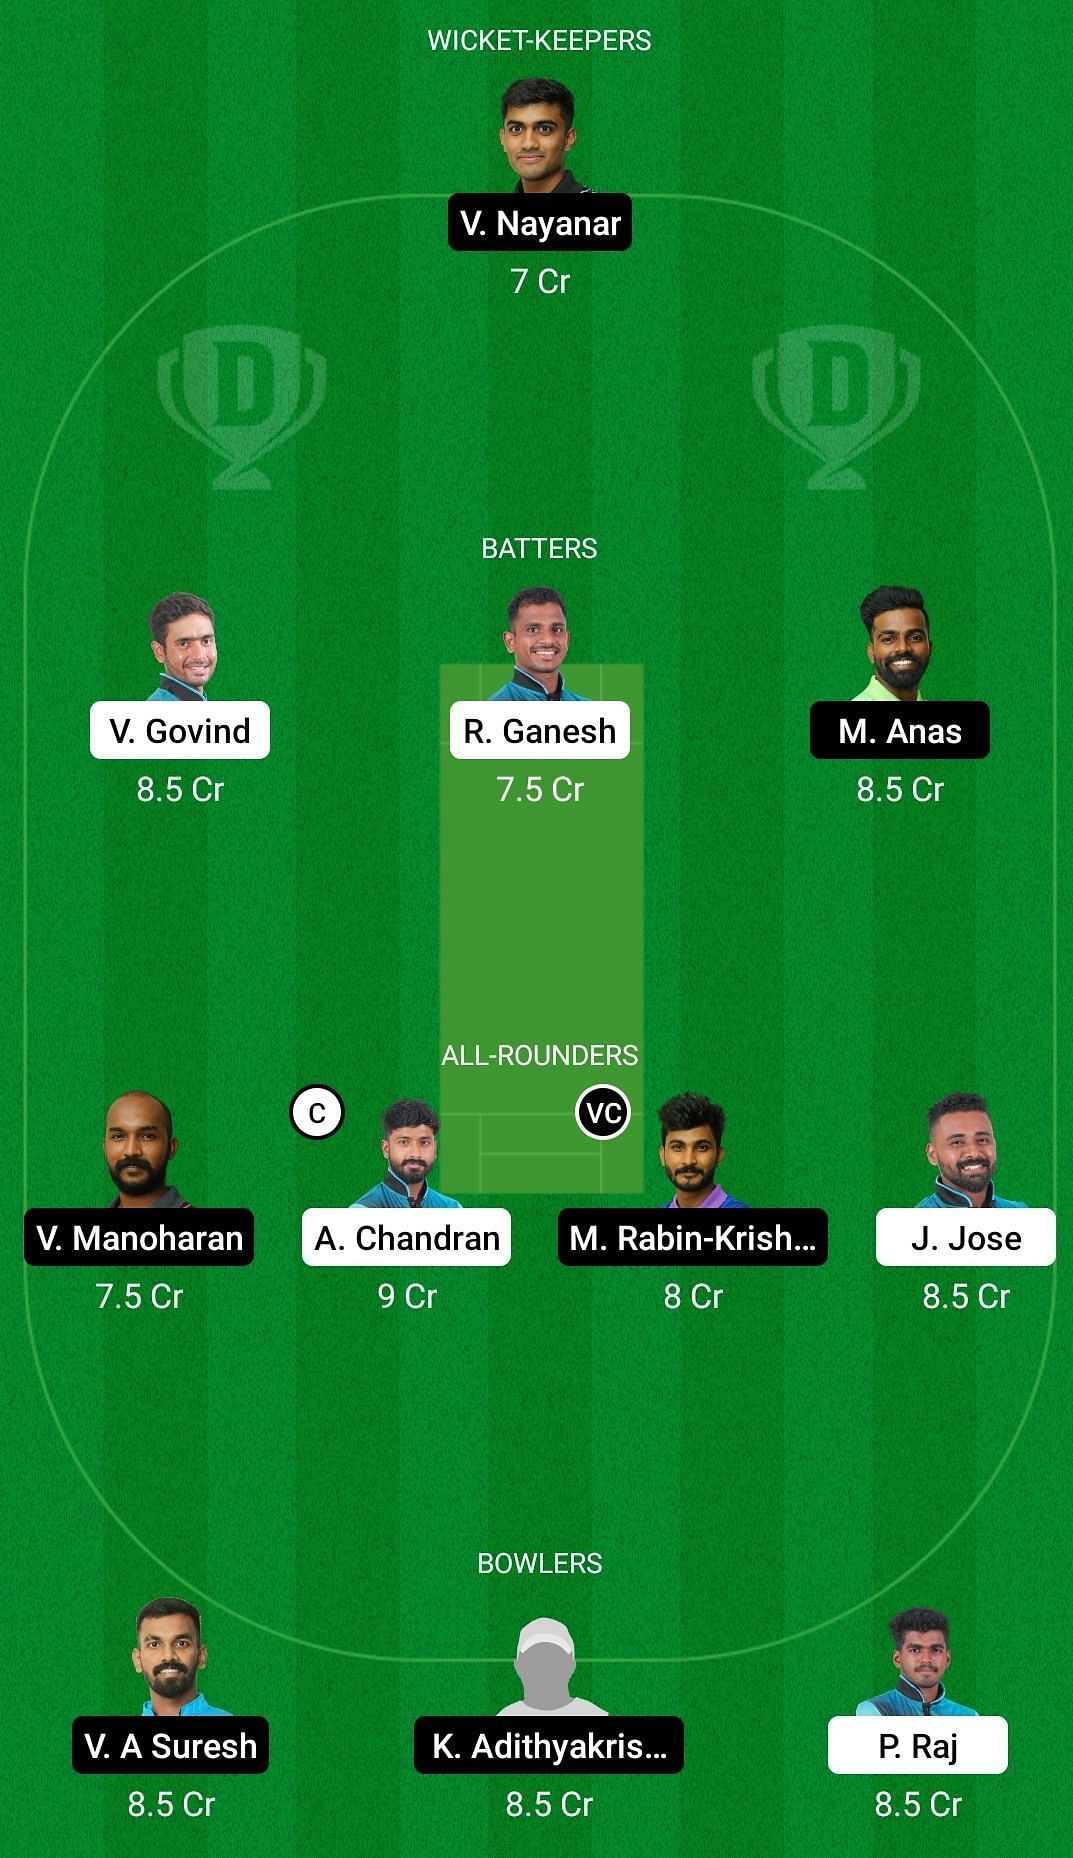 Dream11 Team for KCA Panthers vs KCA Tuskers - KCA President Cup T20 2022.